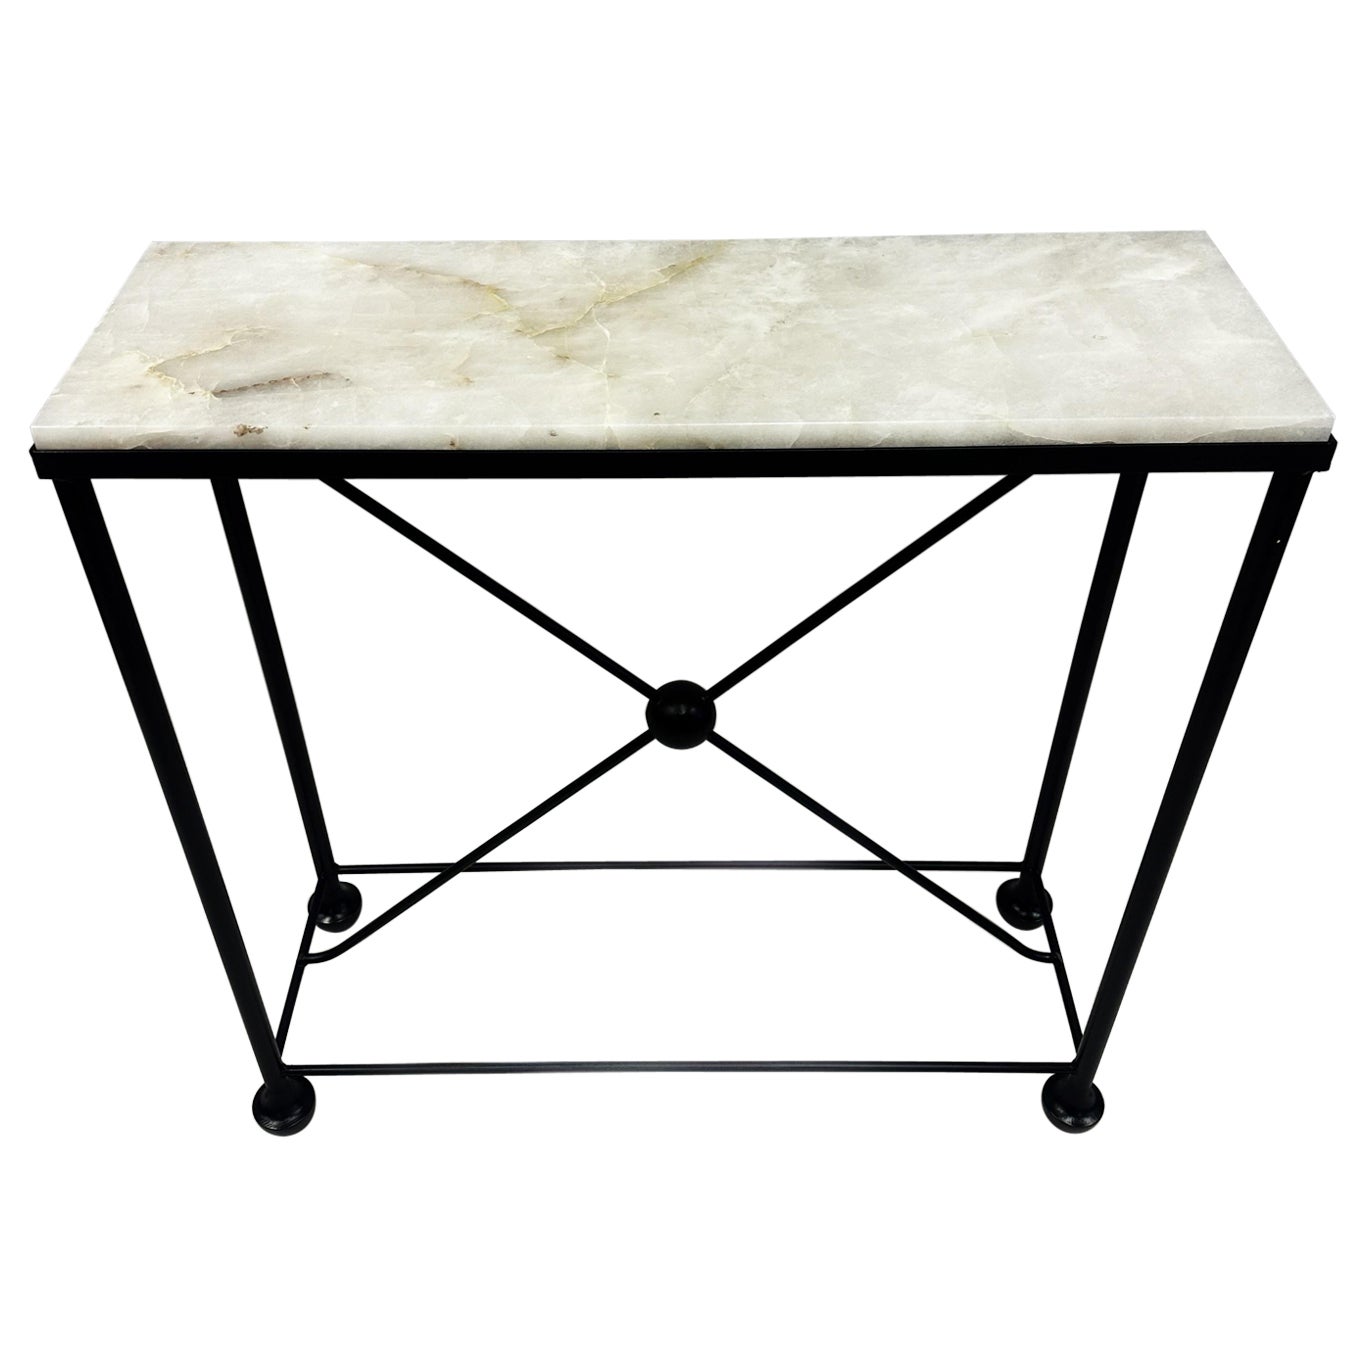 2 French Modern Neoclassical Rock Crystal & Iron Consoles, Jean-Michel Frank For Sale